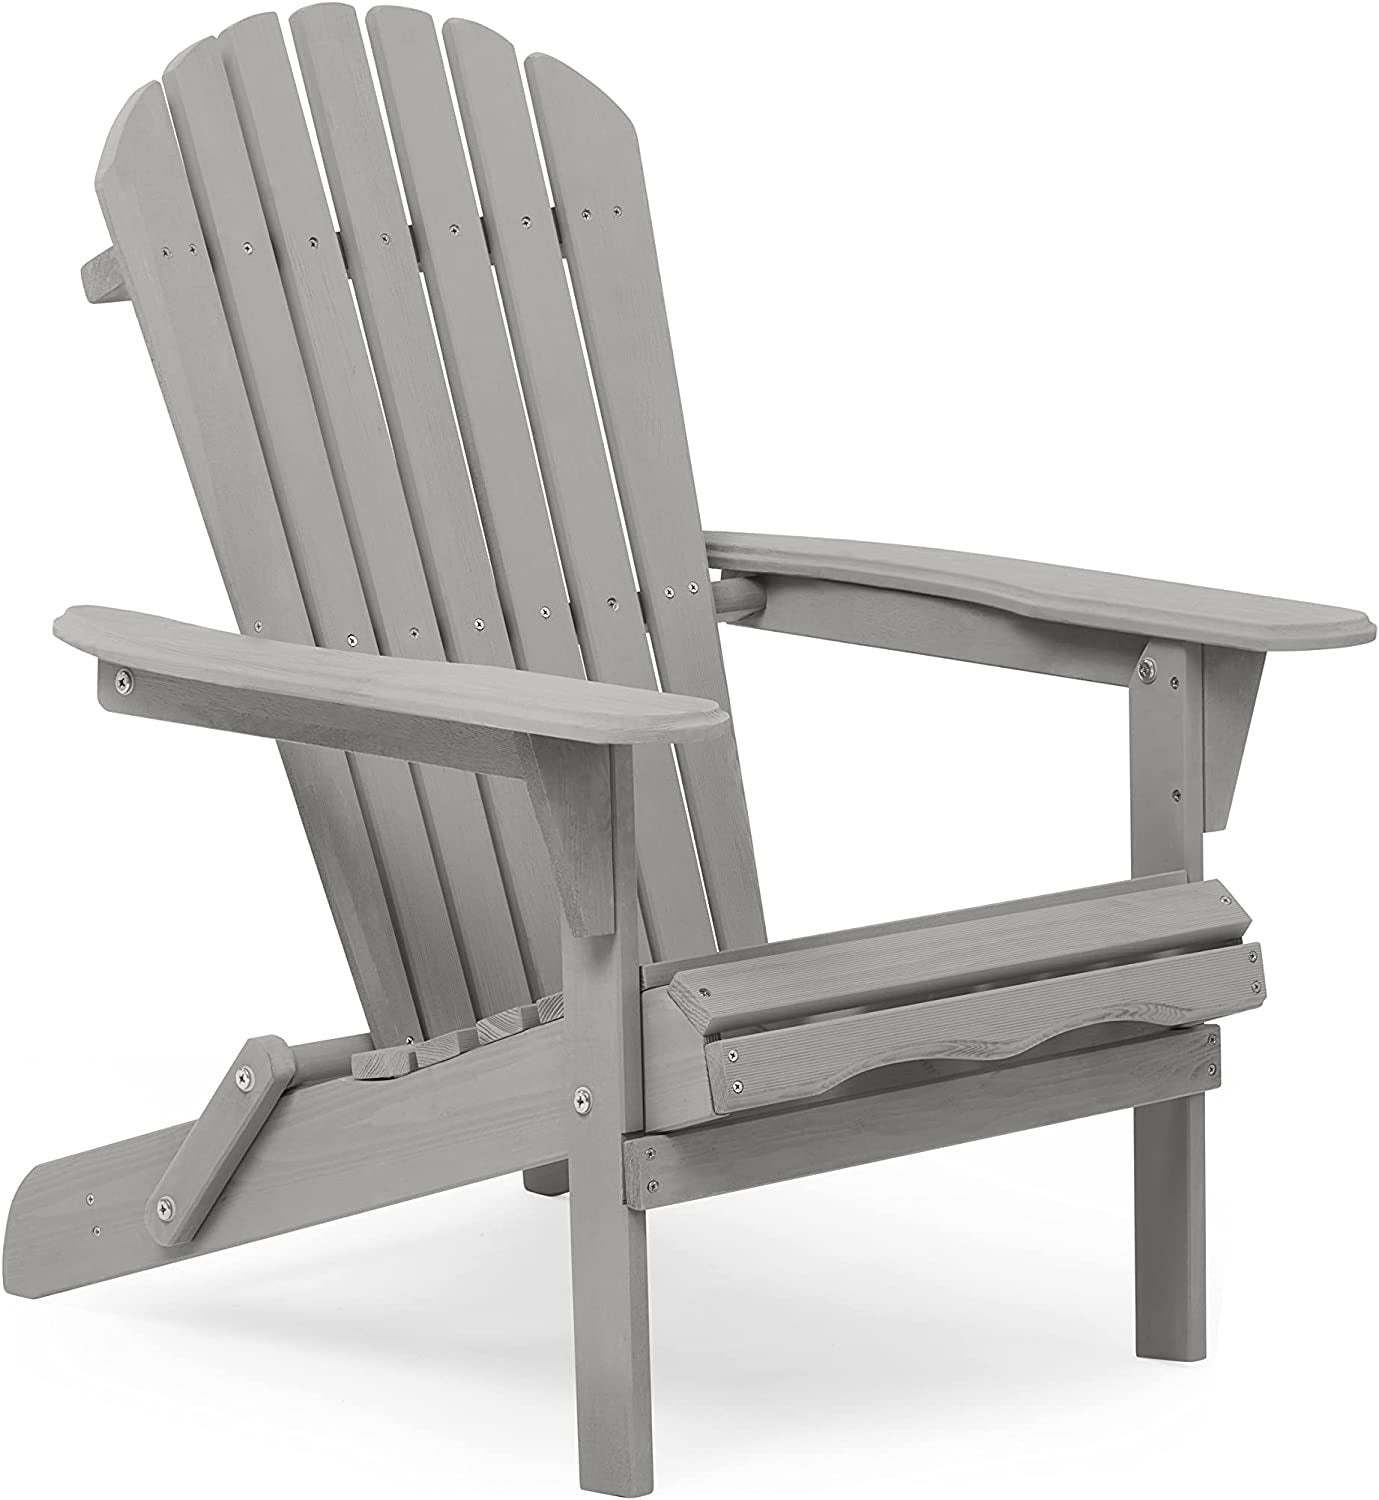 Wood Lounge Patio Chair for Garden Outdoor Wooden Folding Adirondack Chair Set of 2 Solid Cedar Wood Lounge Patio Chair for Garden, Lawn, Backyard,